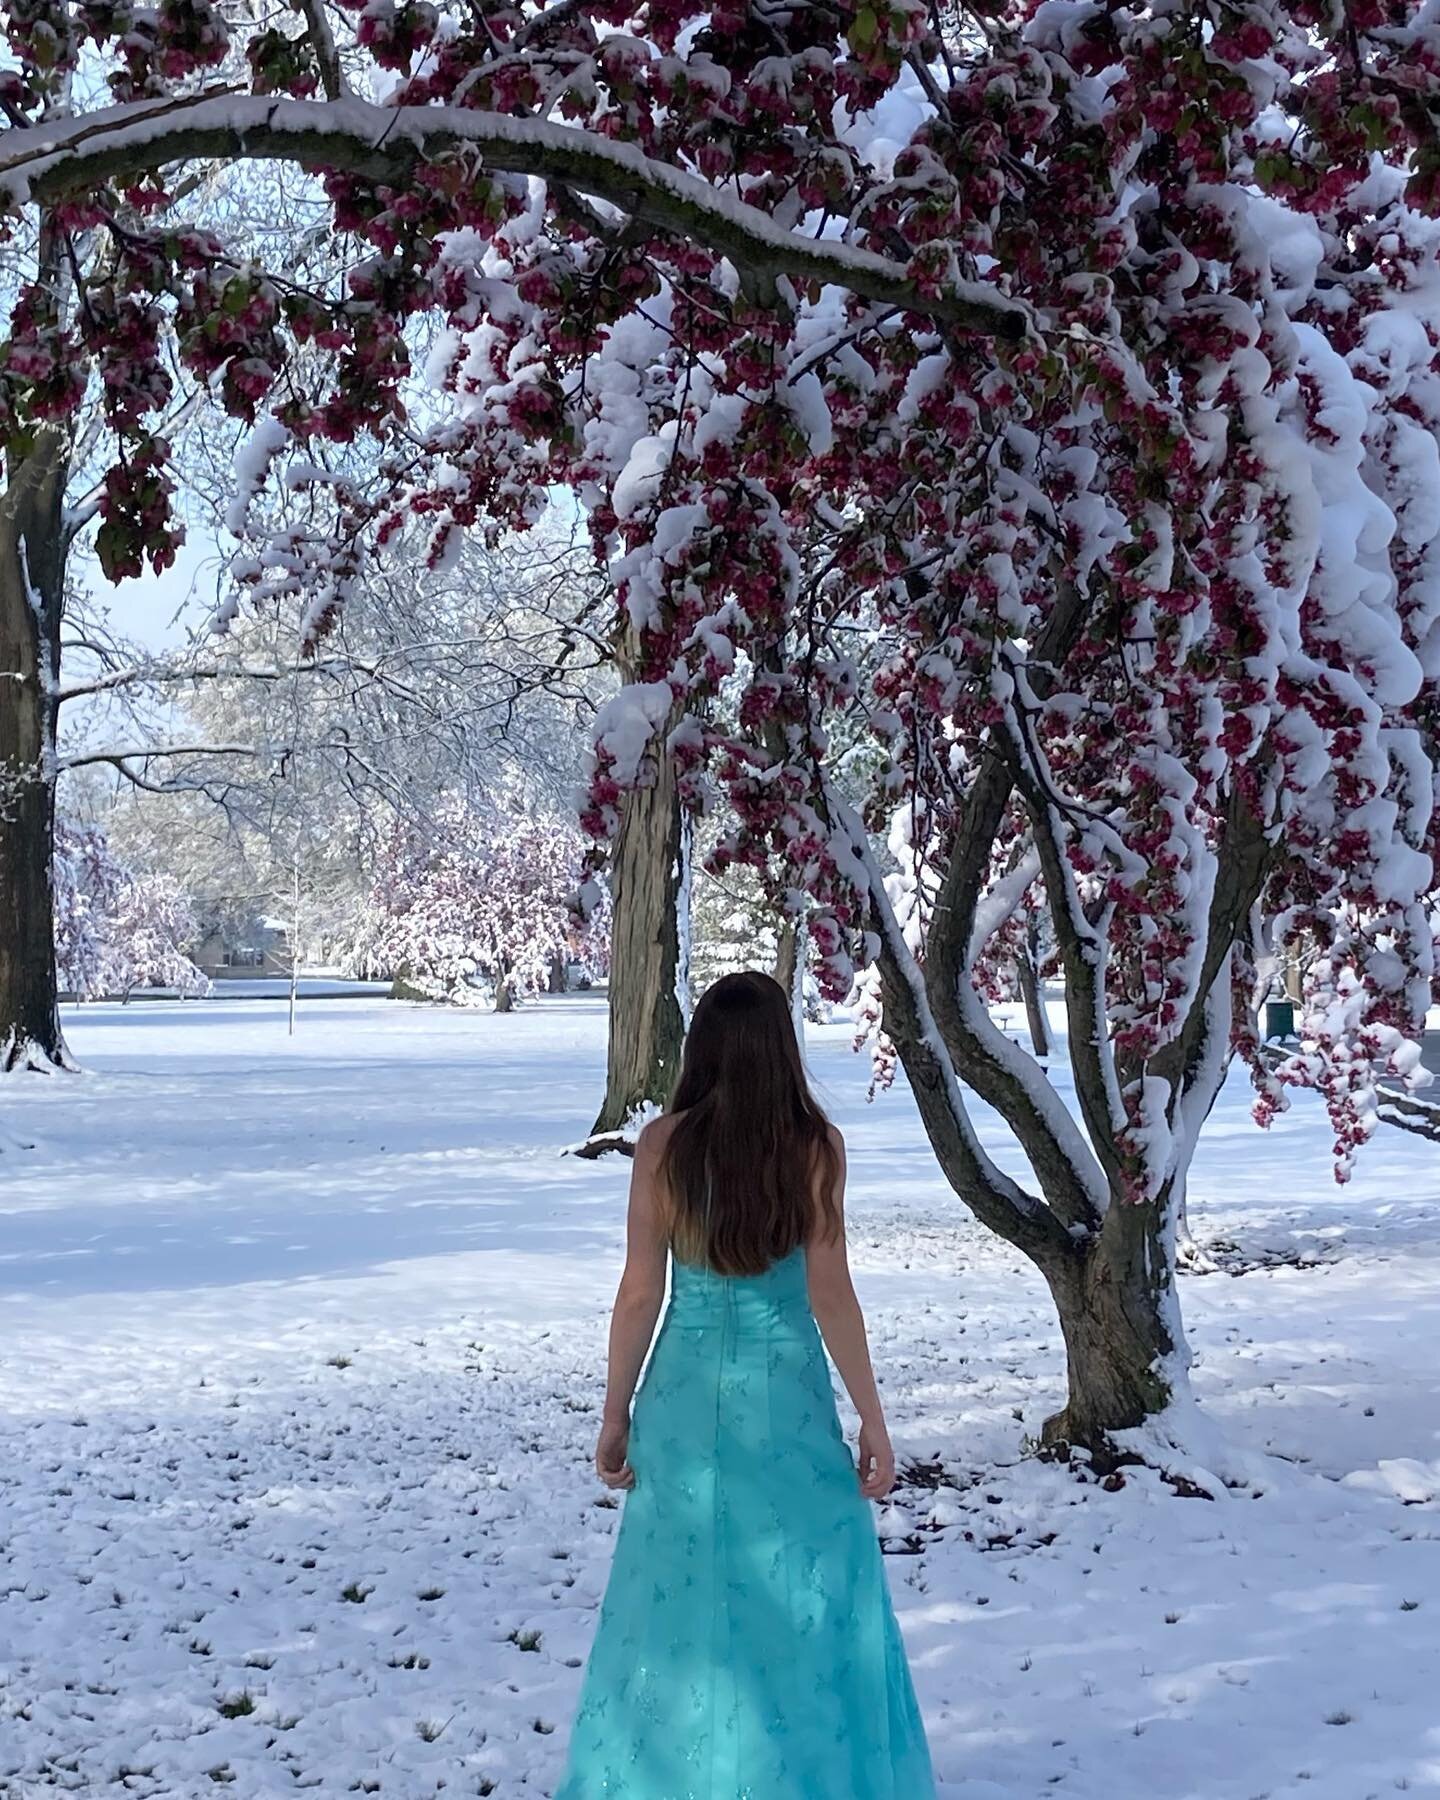 ❄️The cold never bothered me anyway.☃️

When it snowed, I had to take the opportunity to take pictures in my prom dress. I feel like Elsa. :D